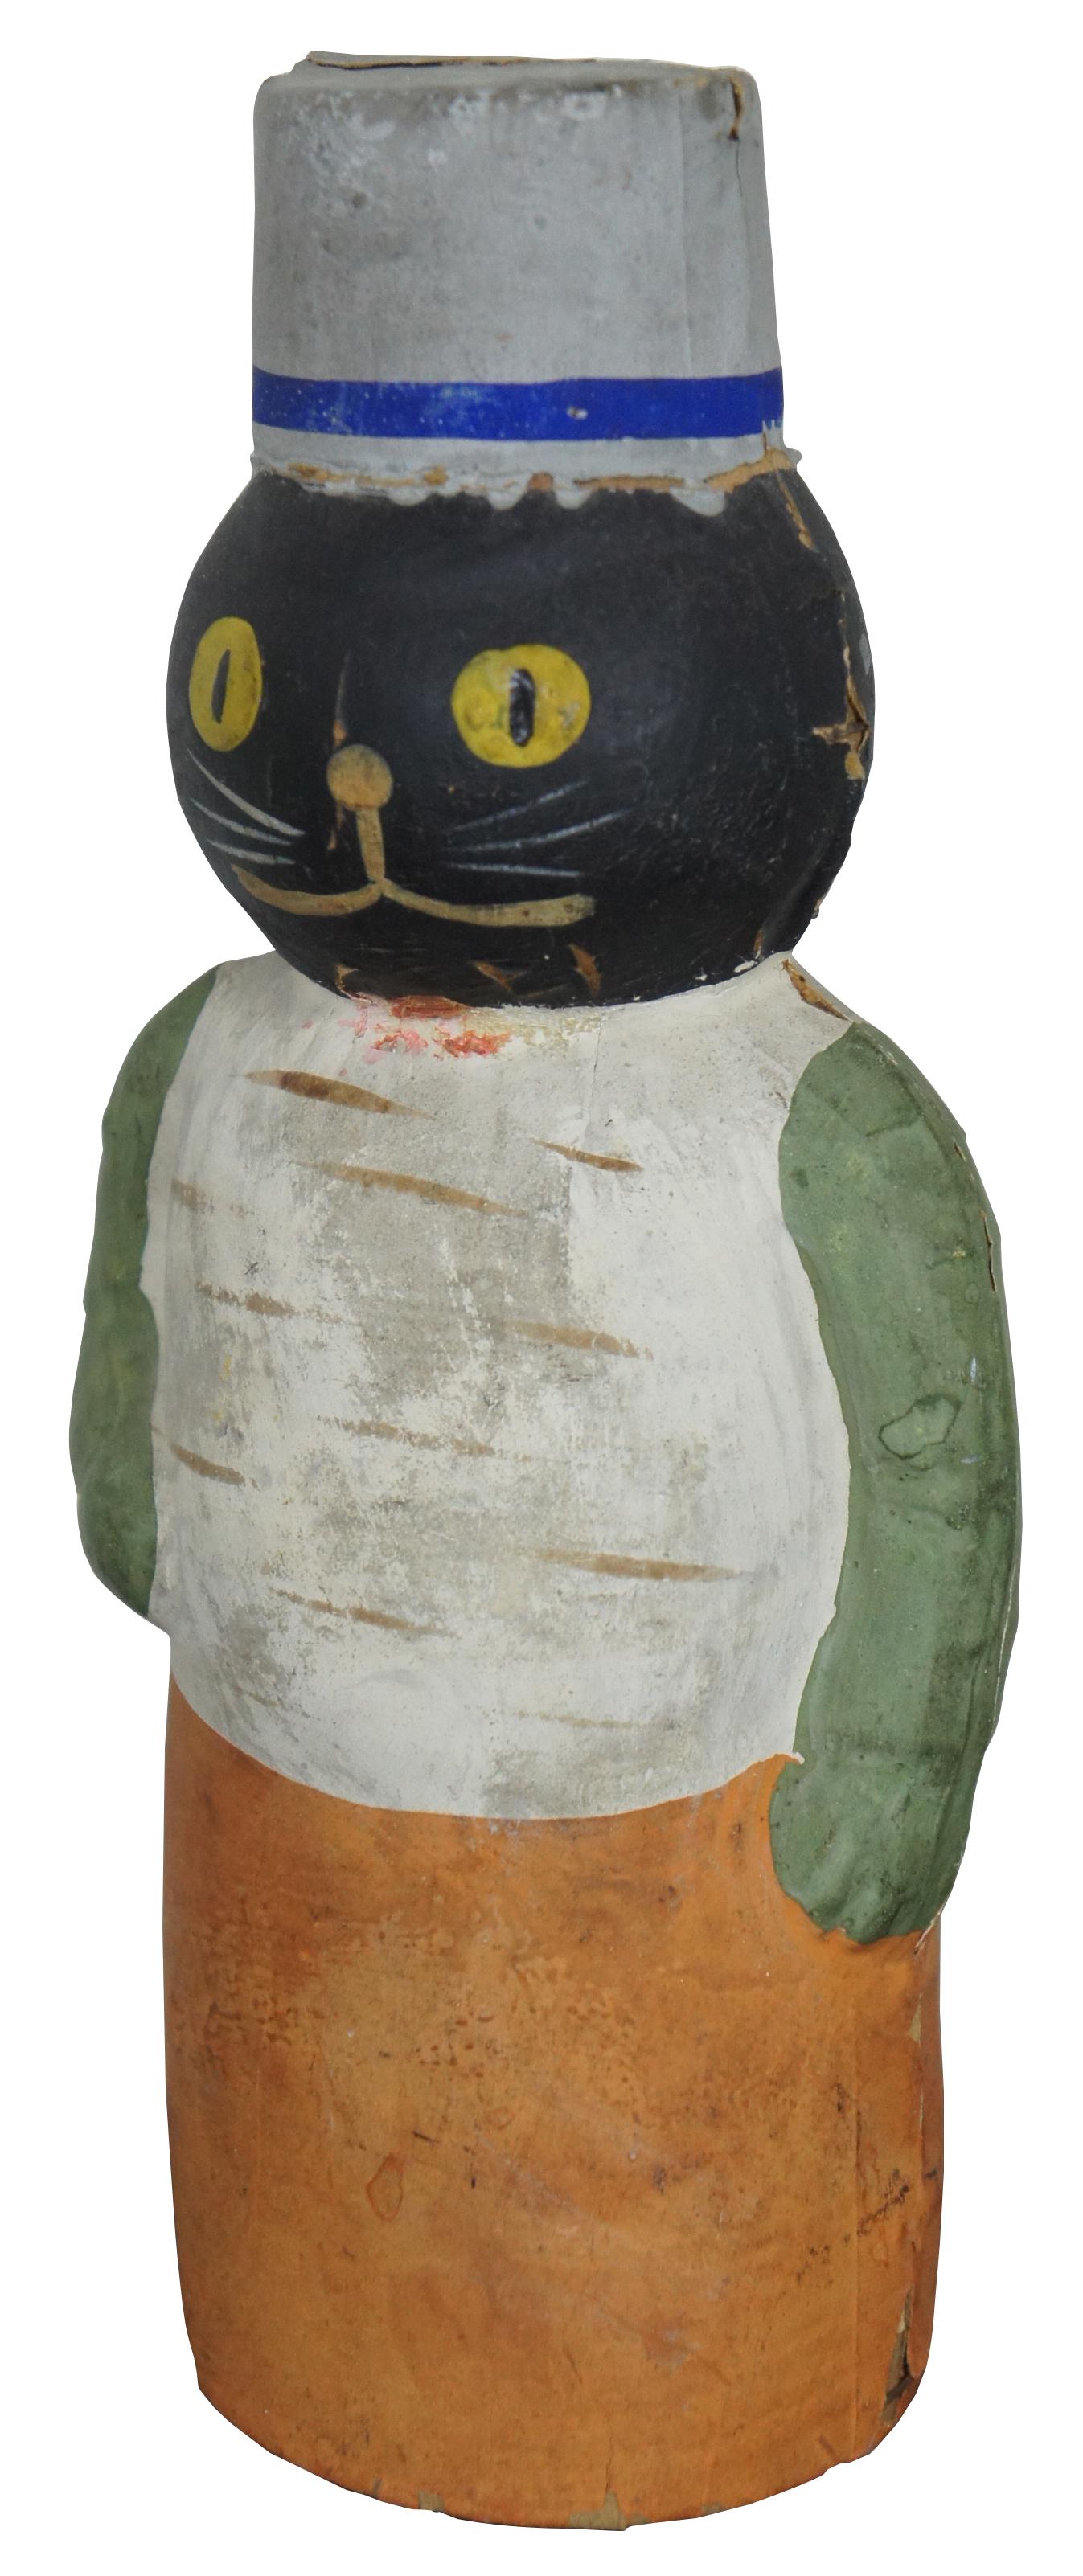 Antique German papier mâché anthropomorphic candy container, shaped like a black cat with yellow eyes dressed in orange, green and white with a gray pill box hat, displayed in a wood base bell jar.

Measures: Bell jar 6.25” x 10.75” / cat 3.5” x